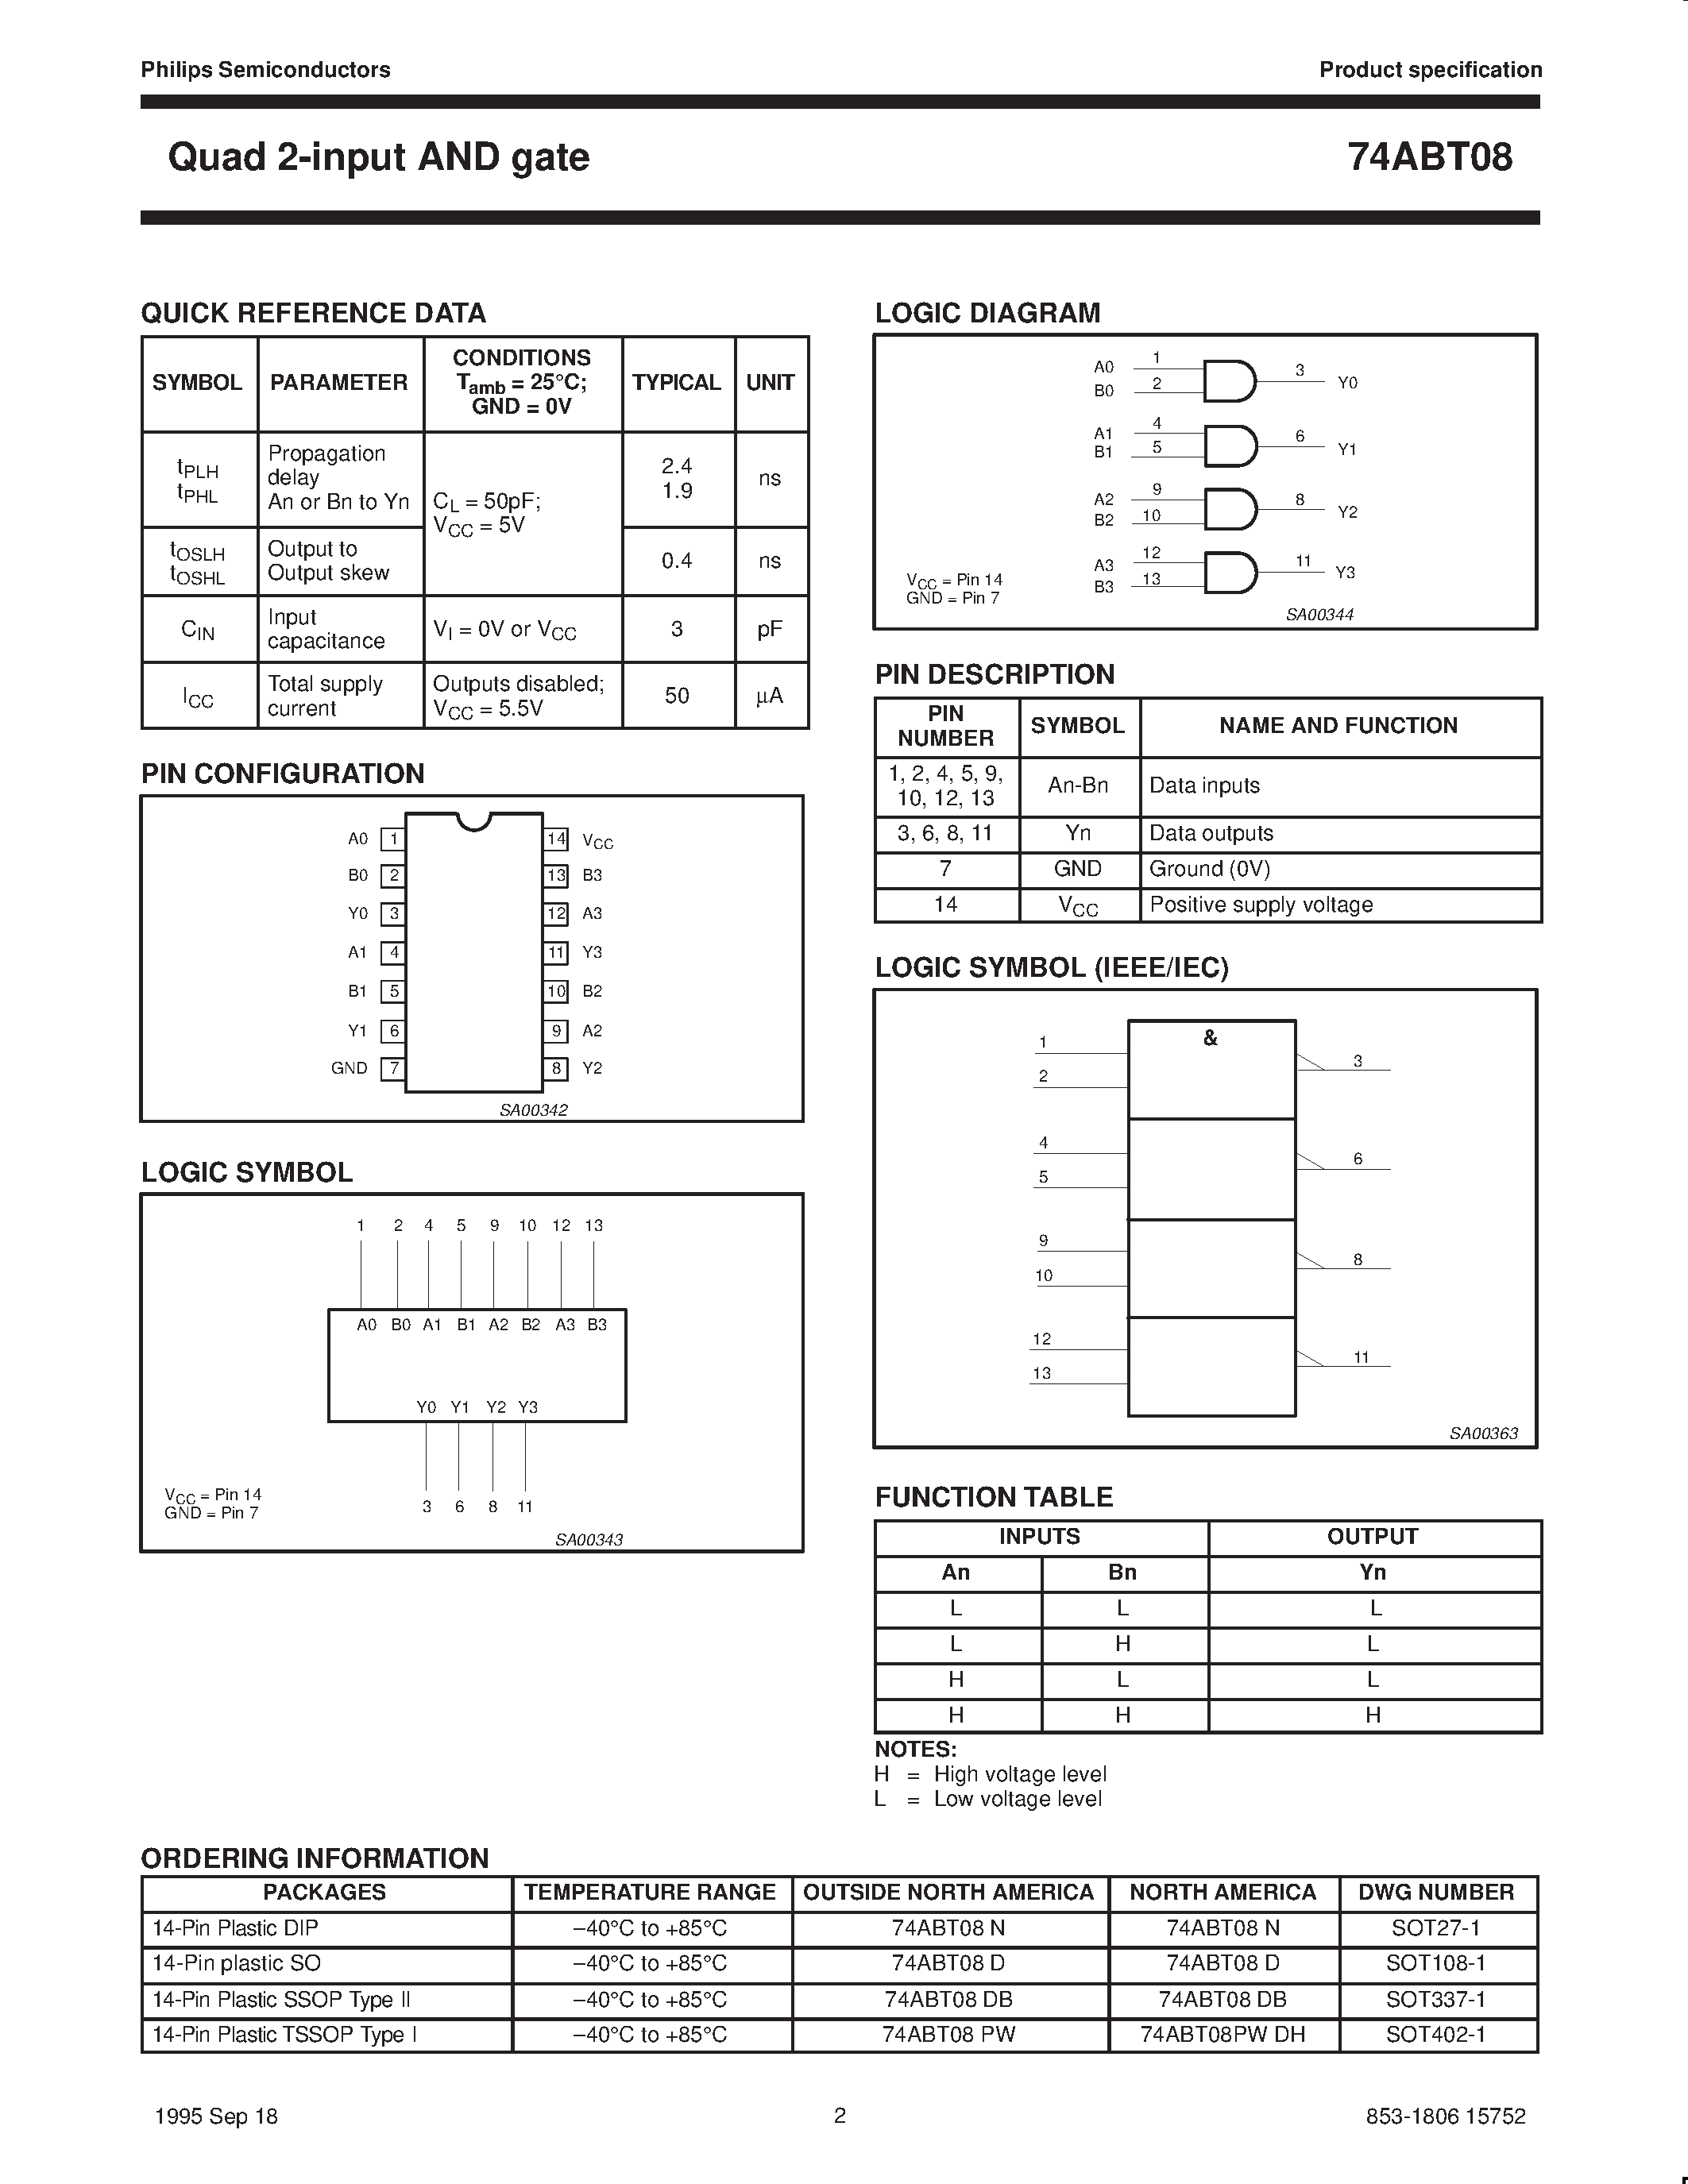 Datasheet 74ABT08D - Quad 2-input AND gate page 2